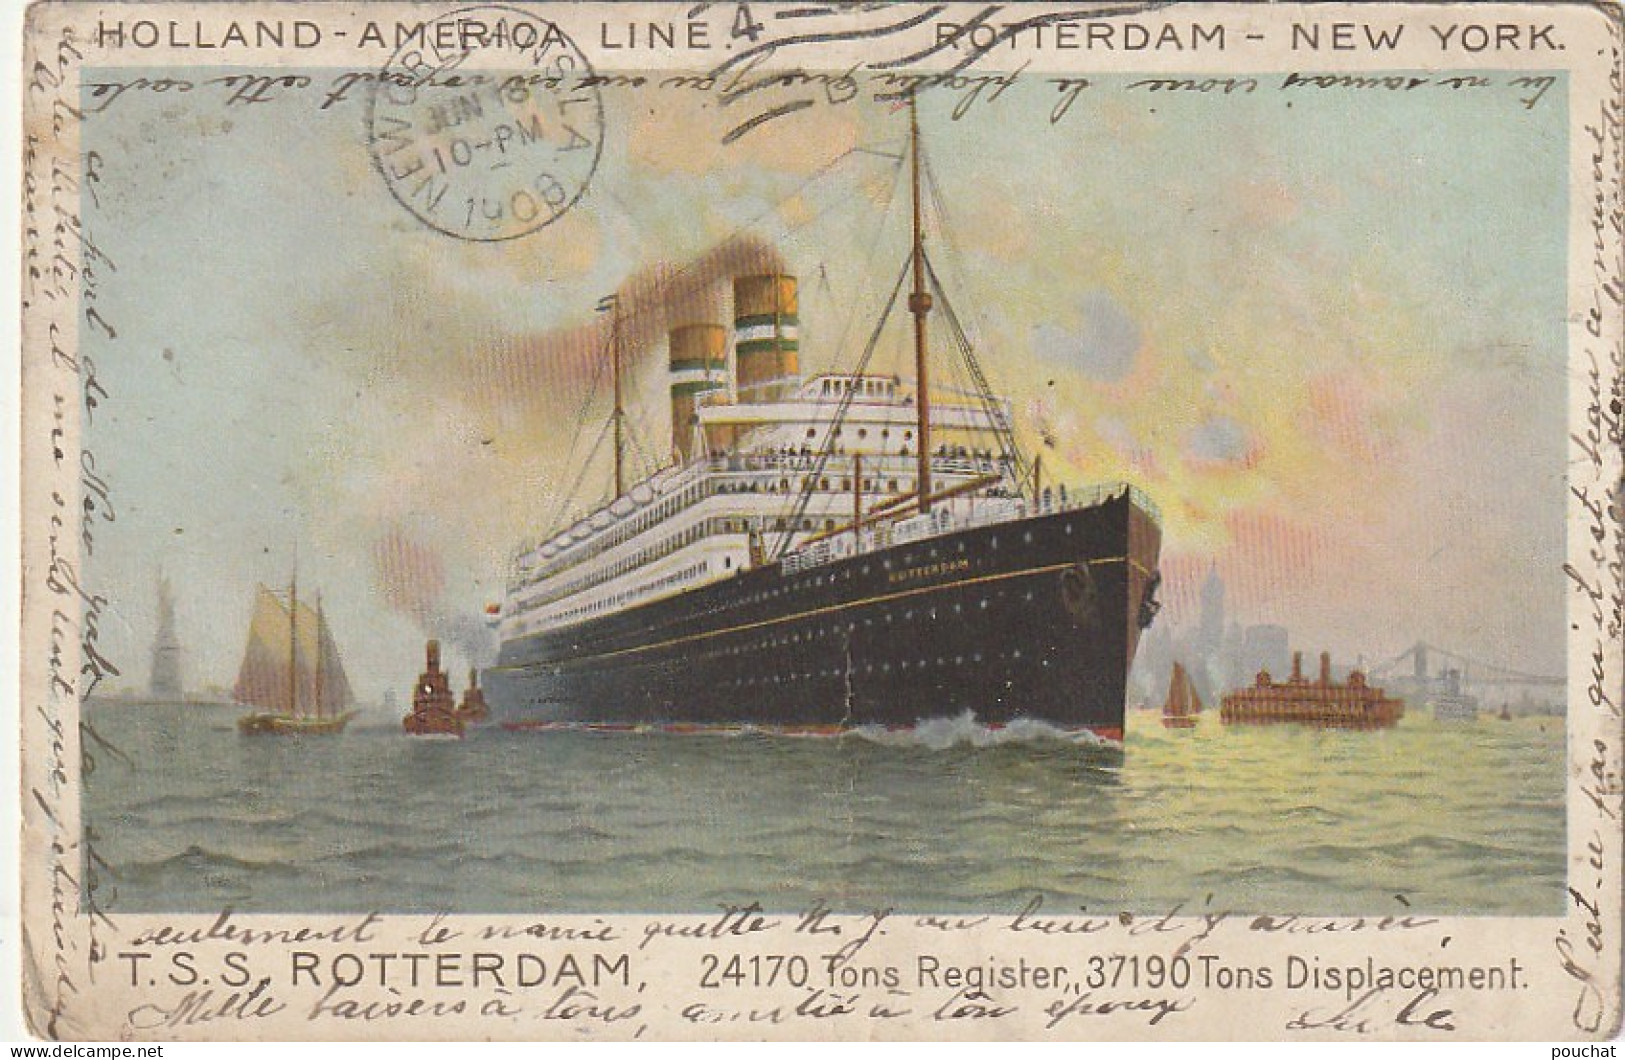 ZY 138- T. S. S. ROTTERDAM  - HOLLAND AMERICA LINE - ROTTERDAM NEW YORK - PAQUEBOT - 2 SCANS - Paquebote